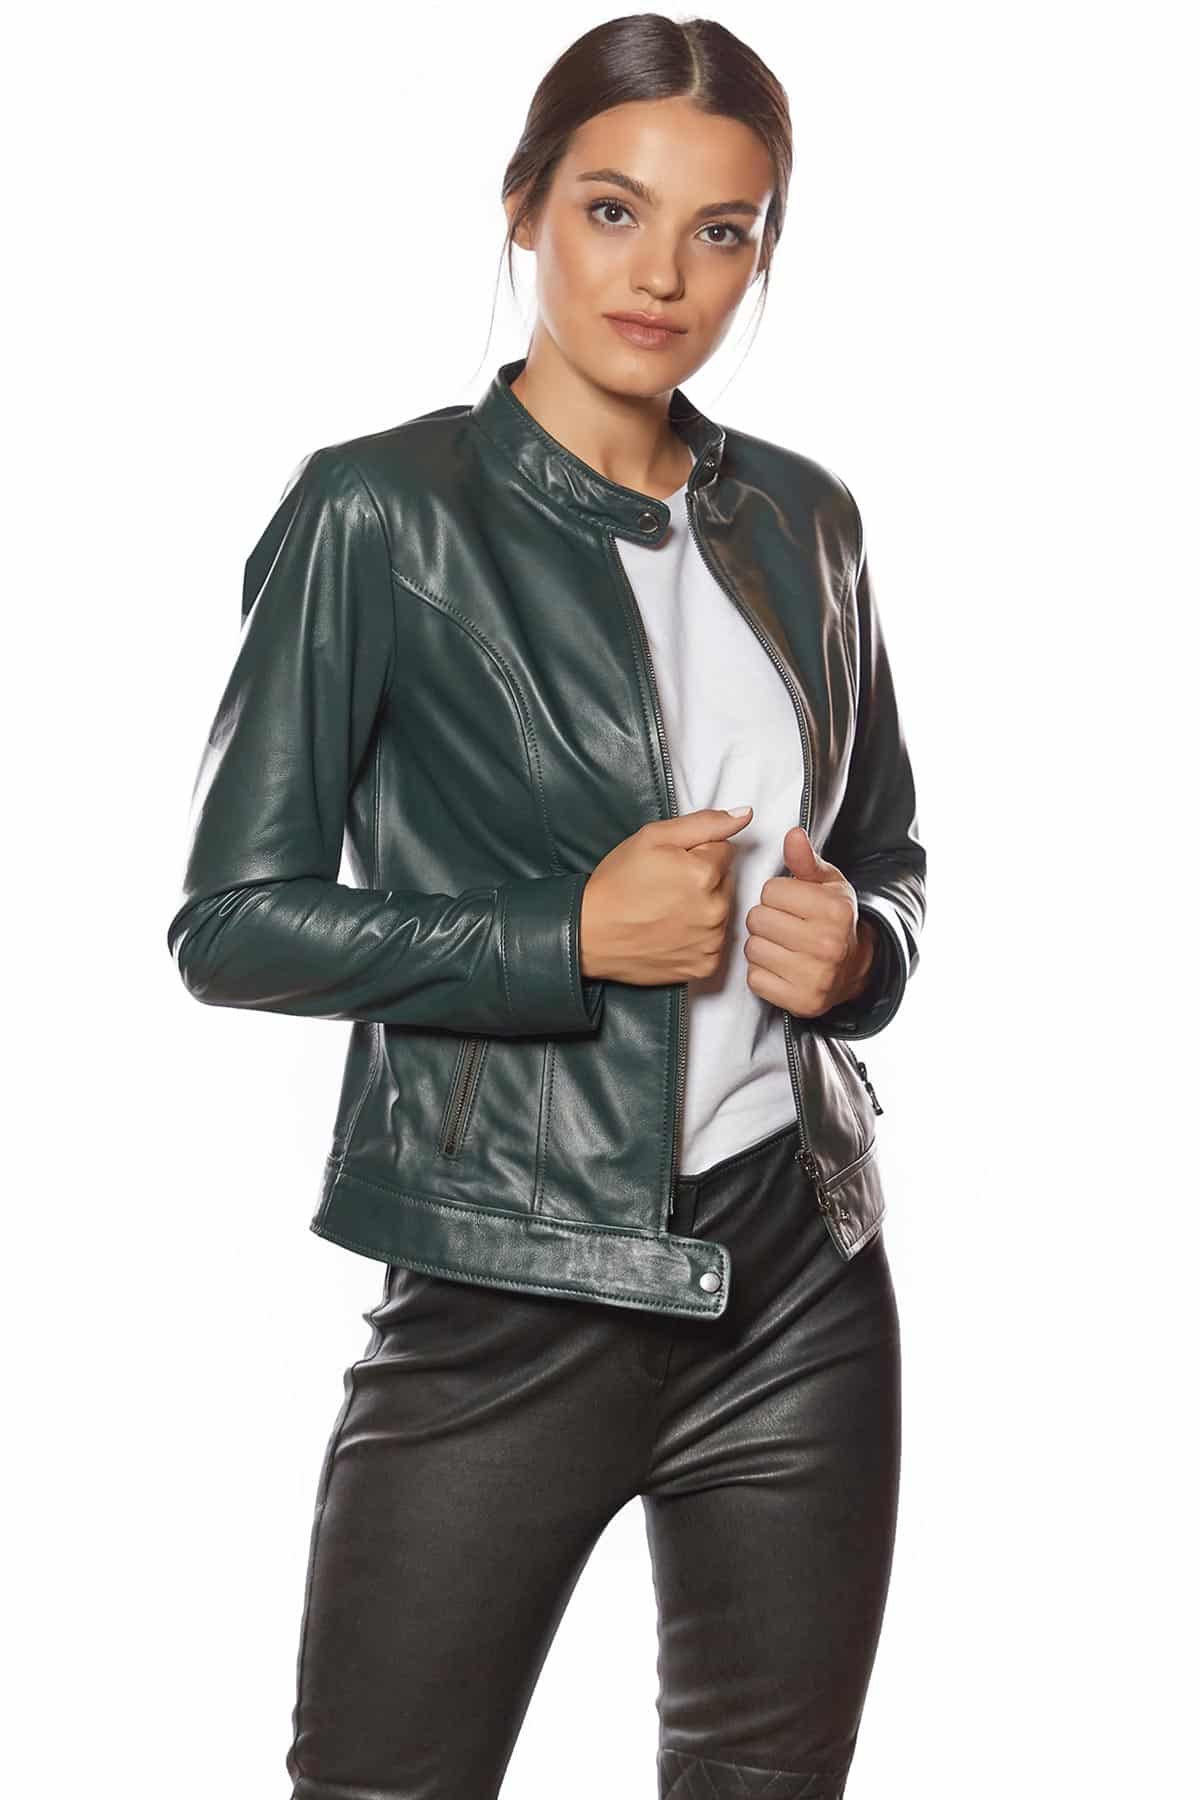 Women's Leather Motorcycle Jackets - 100% Real Leather